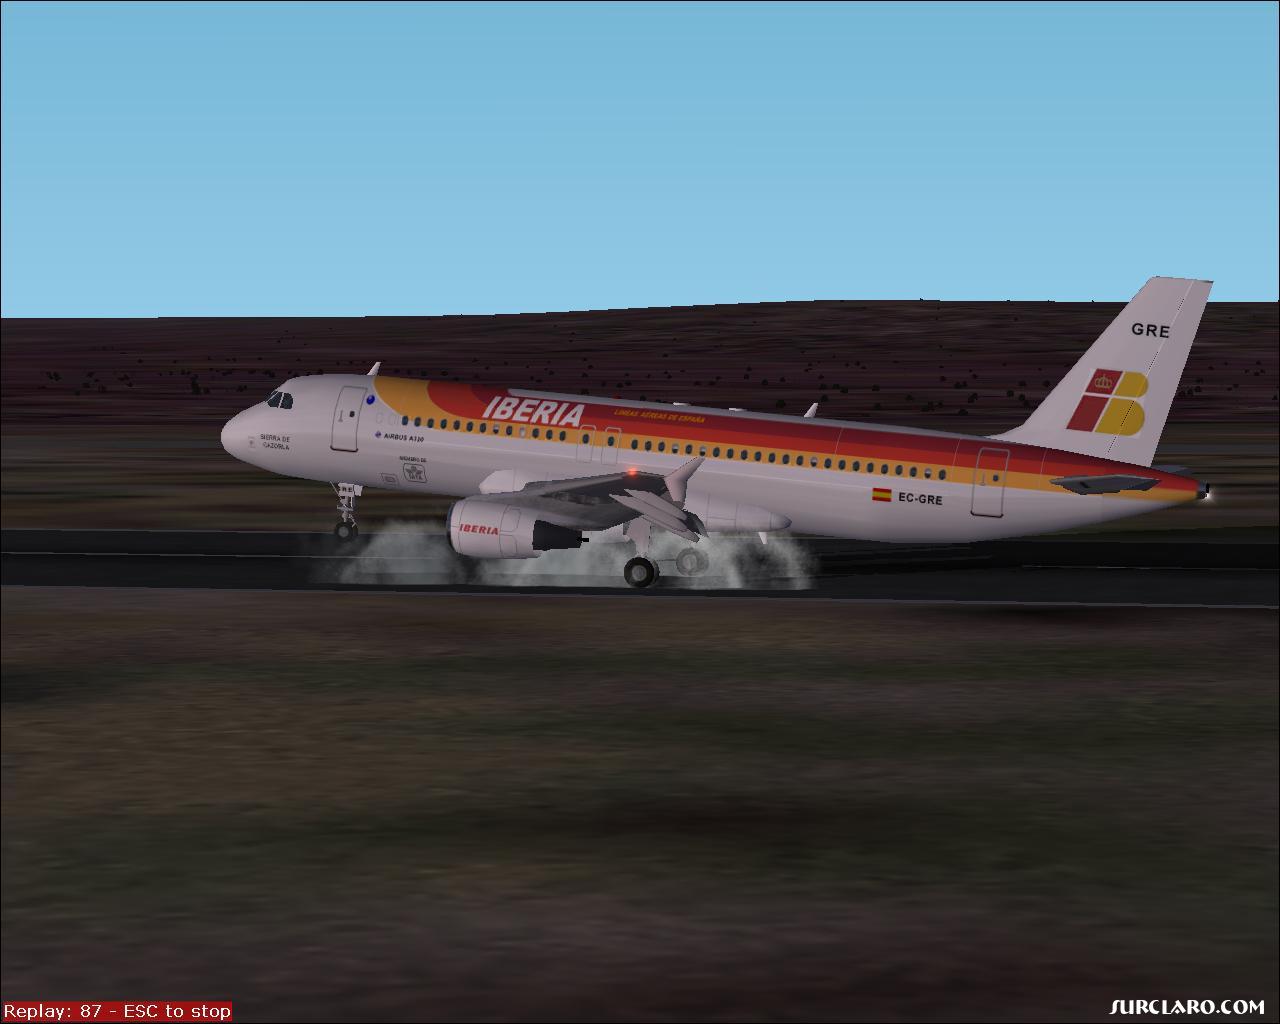 Iberias A320 lands in Zaragoza's Aiport in Spain. - Photo 606